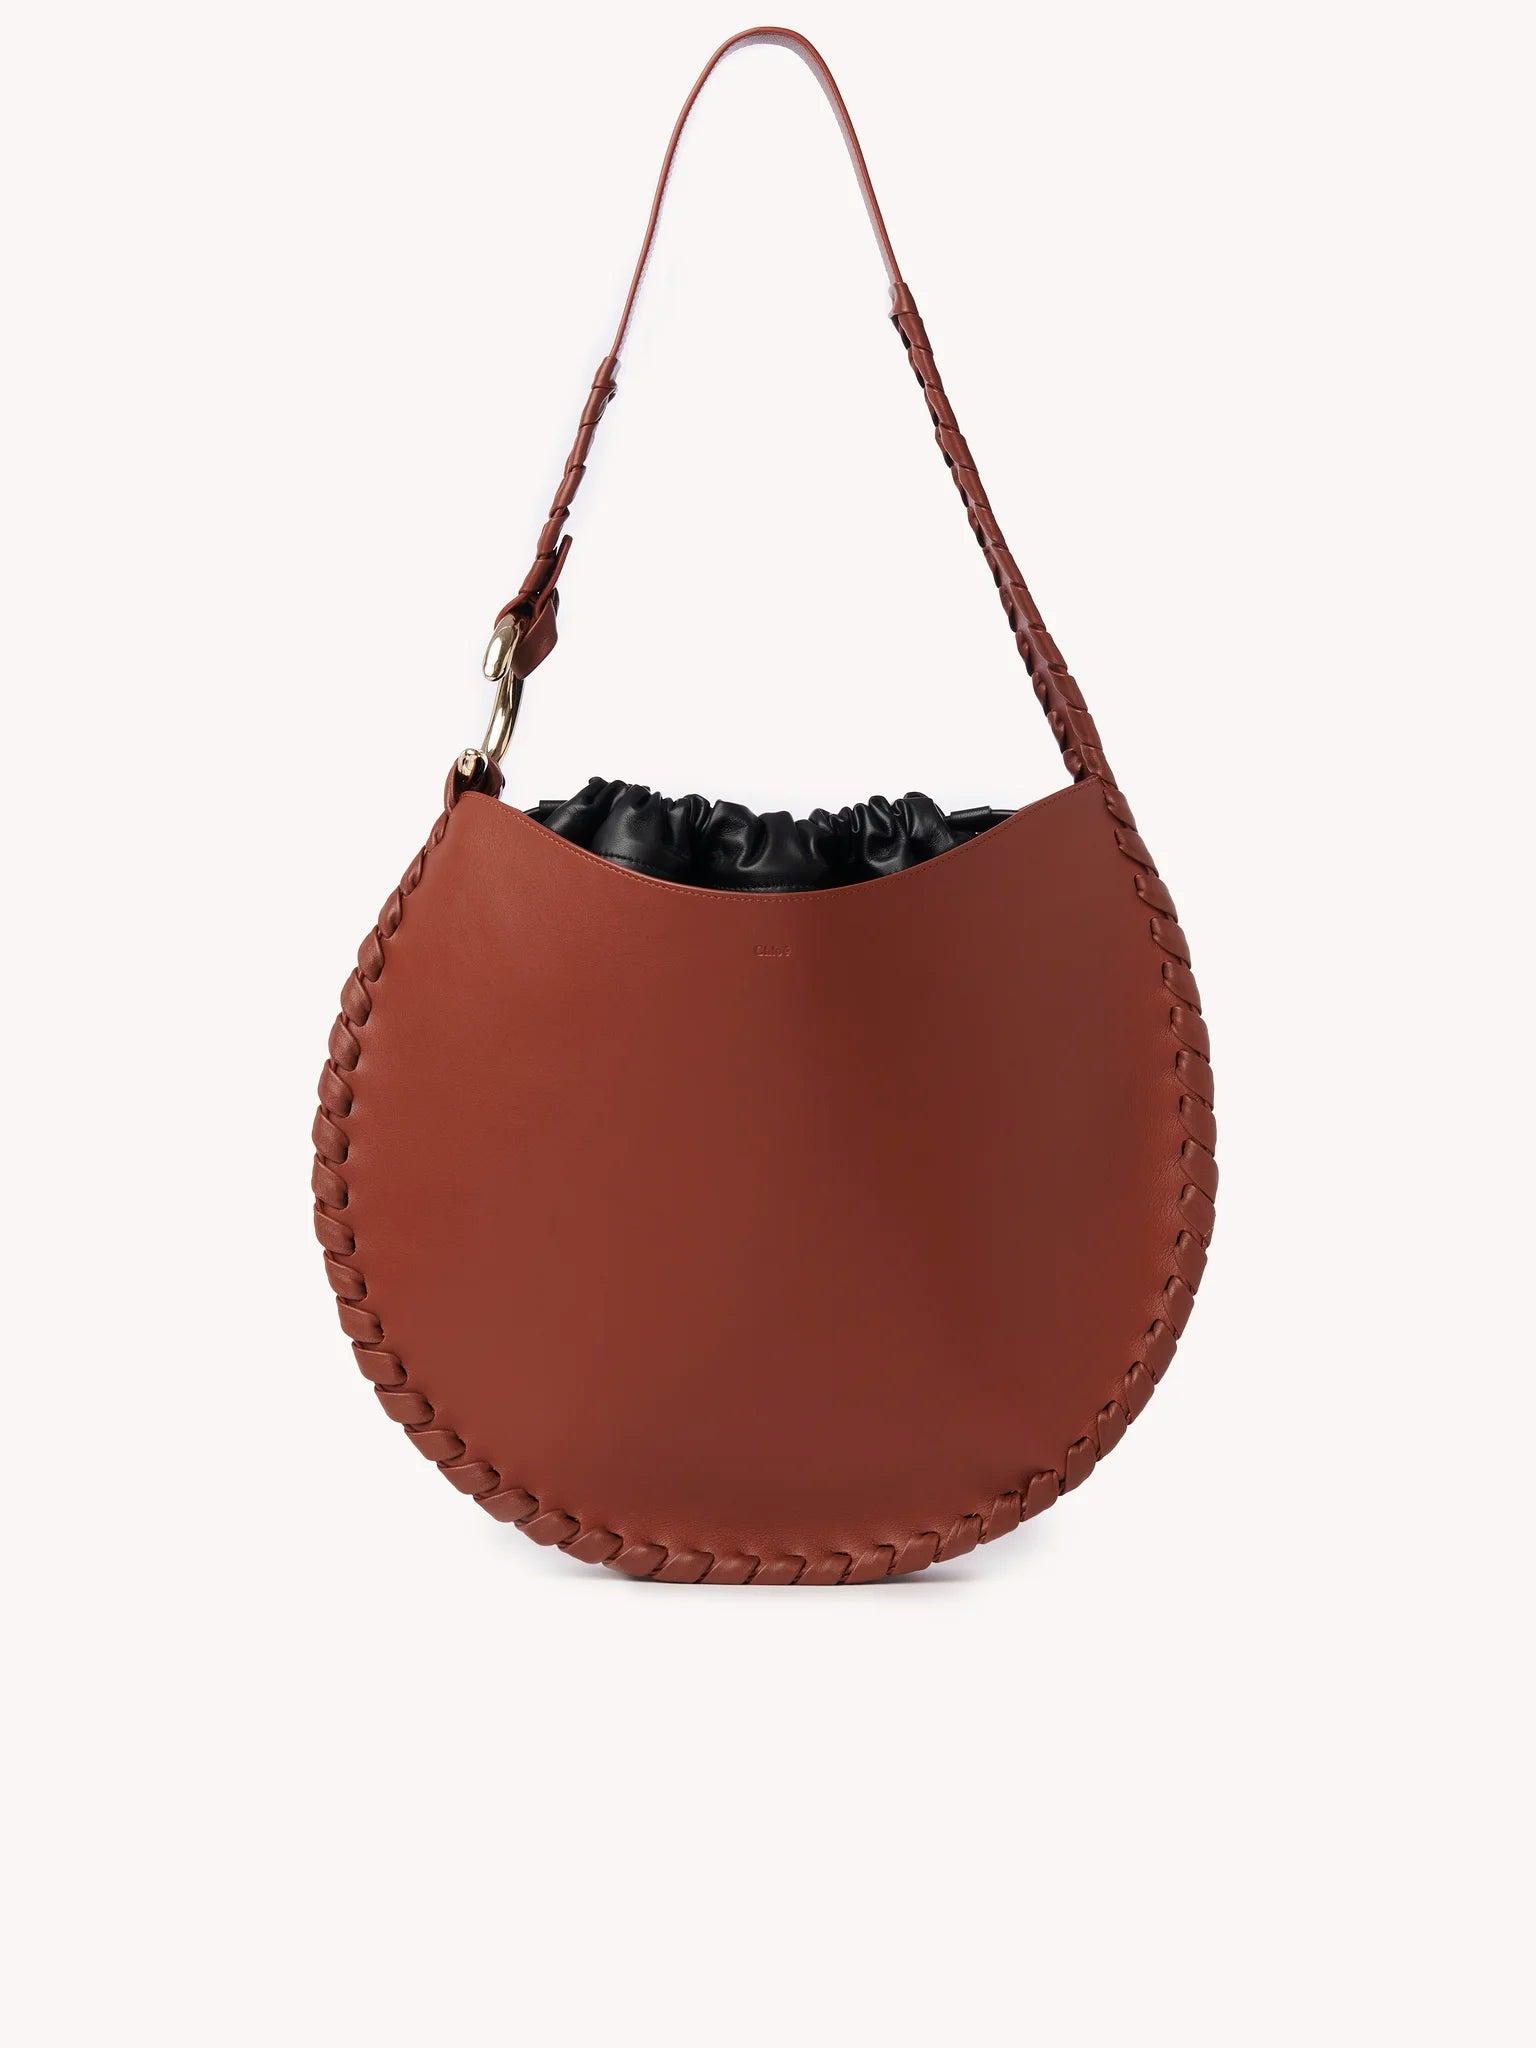 Chloé Large Mate Hobo Bag In Calf Leather in Brown | Lyst